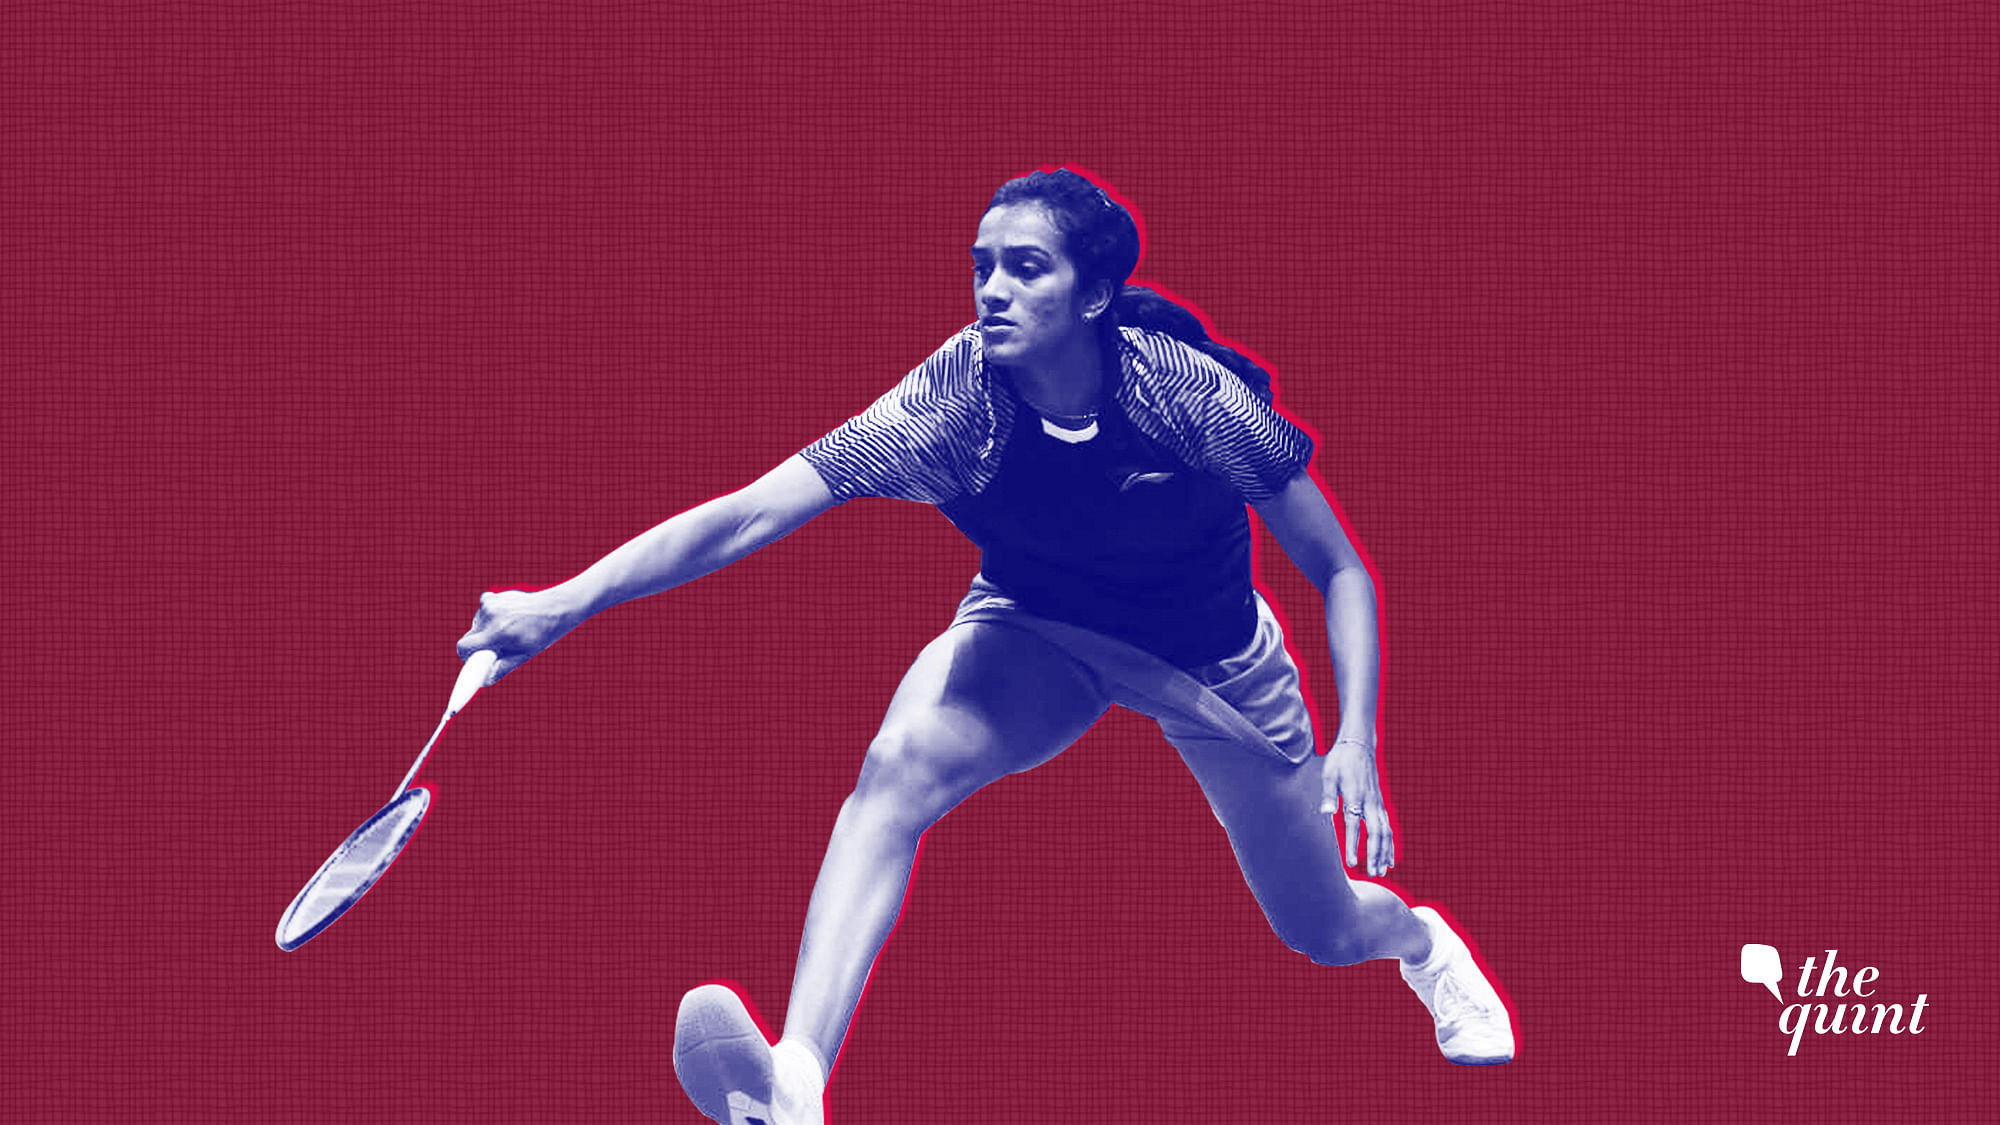 Sindhu registered her career’s biggest triumph at the World Championship in Basel, Switzerland in August, but since then the Indian looked awfully out of form.